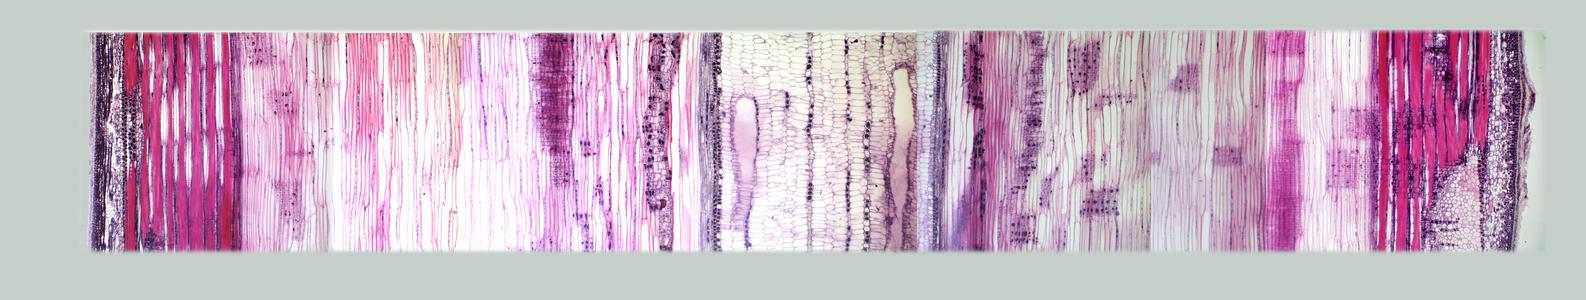 Composite of images showing an entire transect of a longitudinal section of of a two-year old Tilia stem